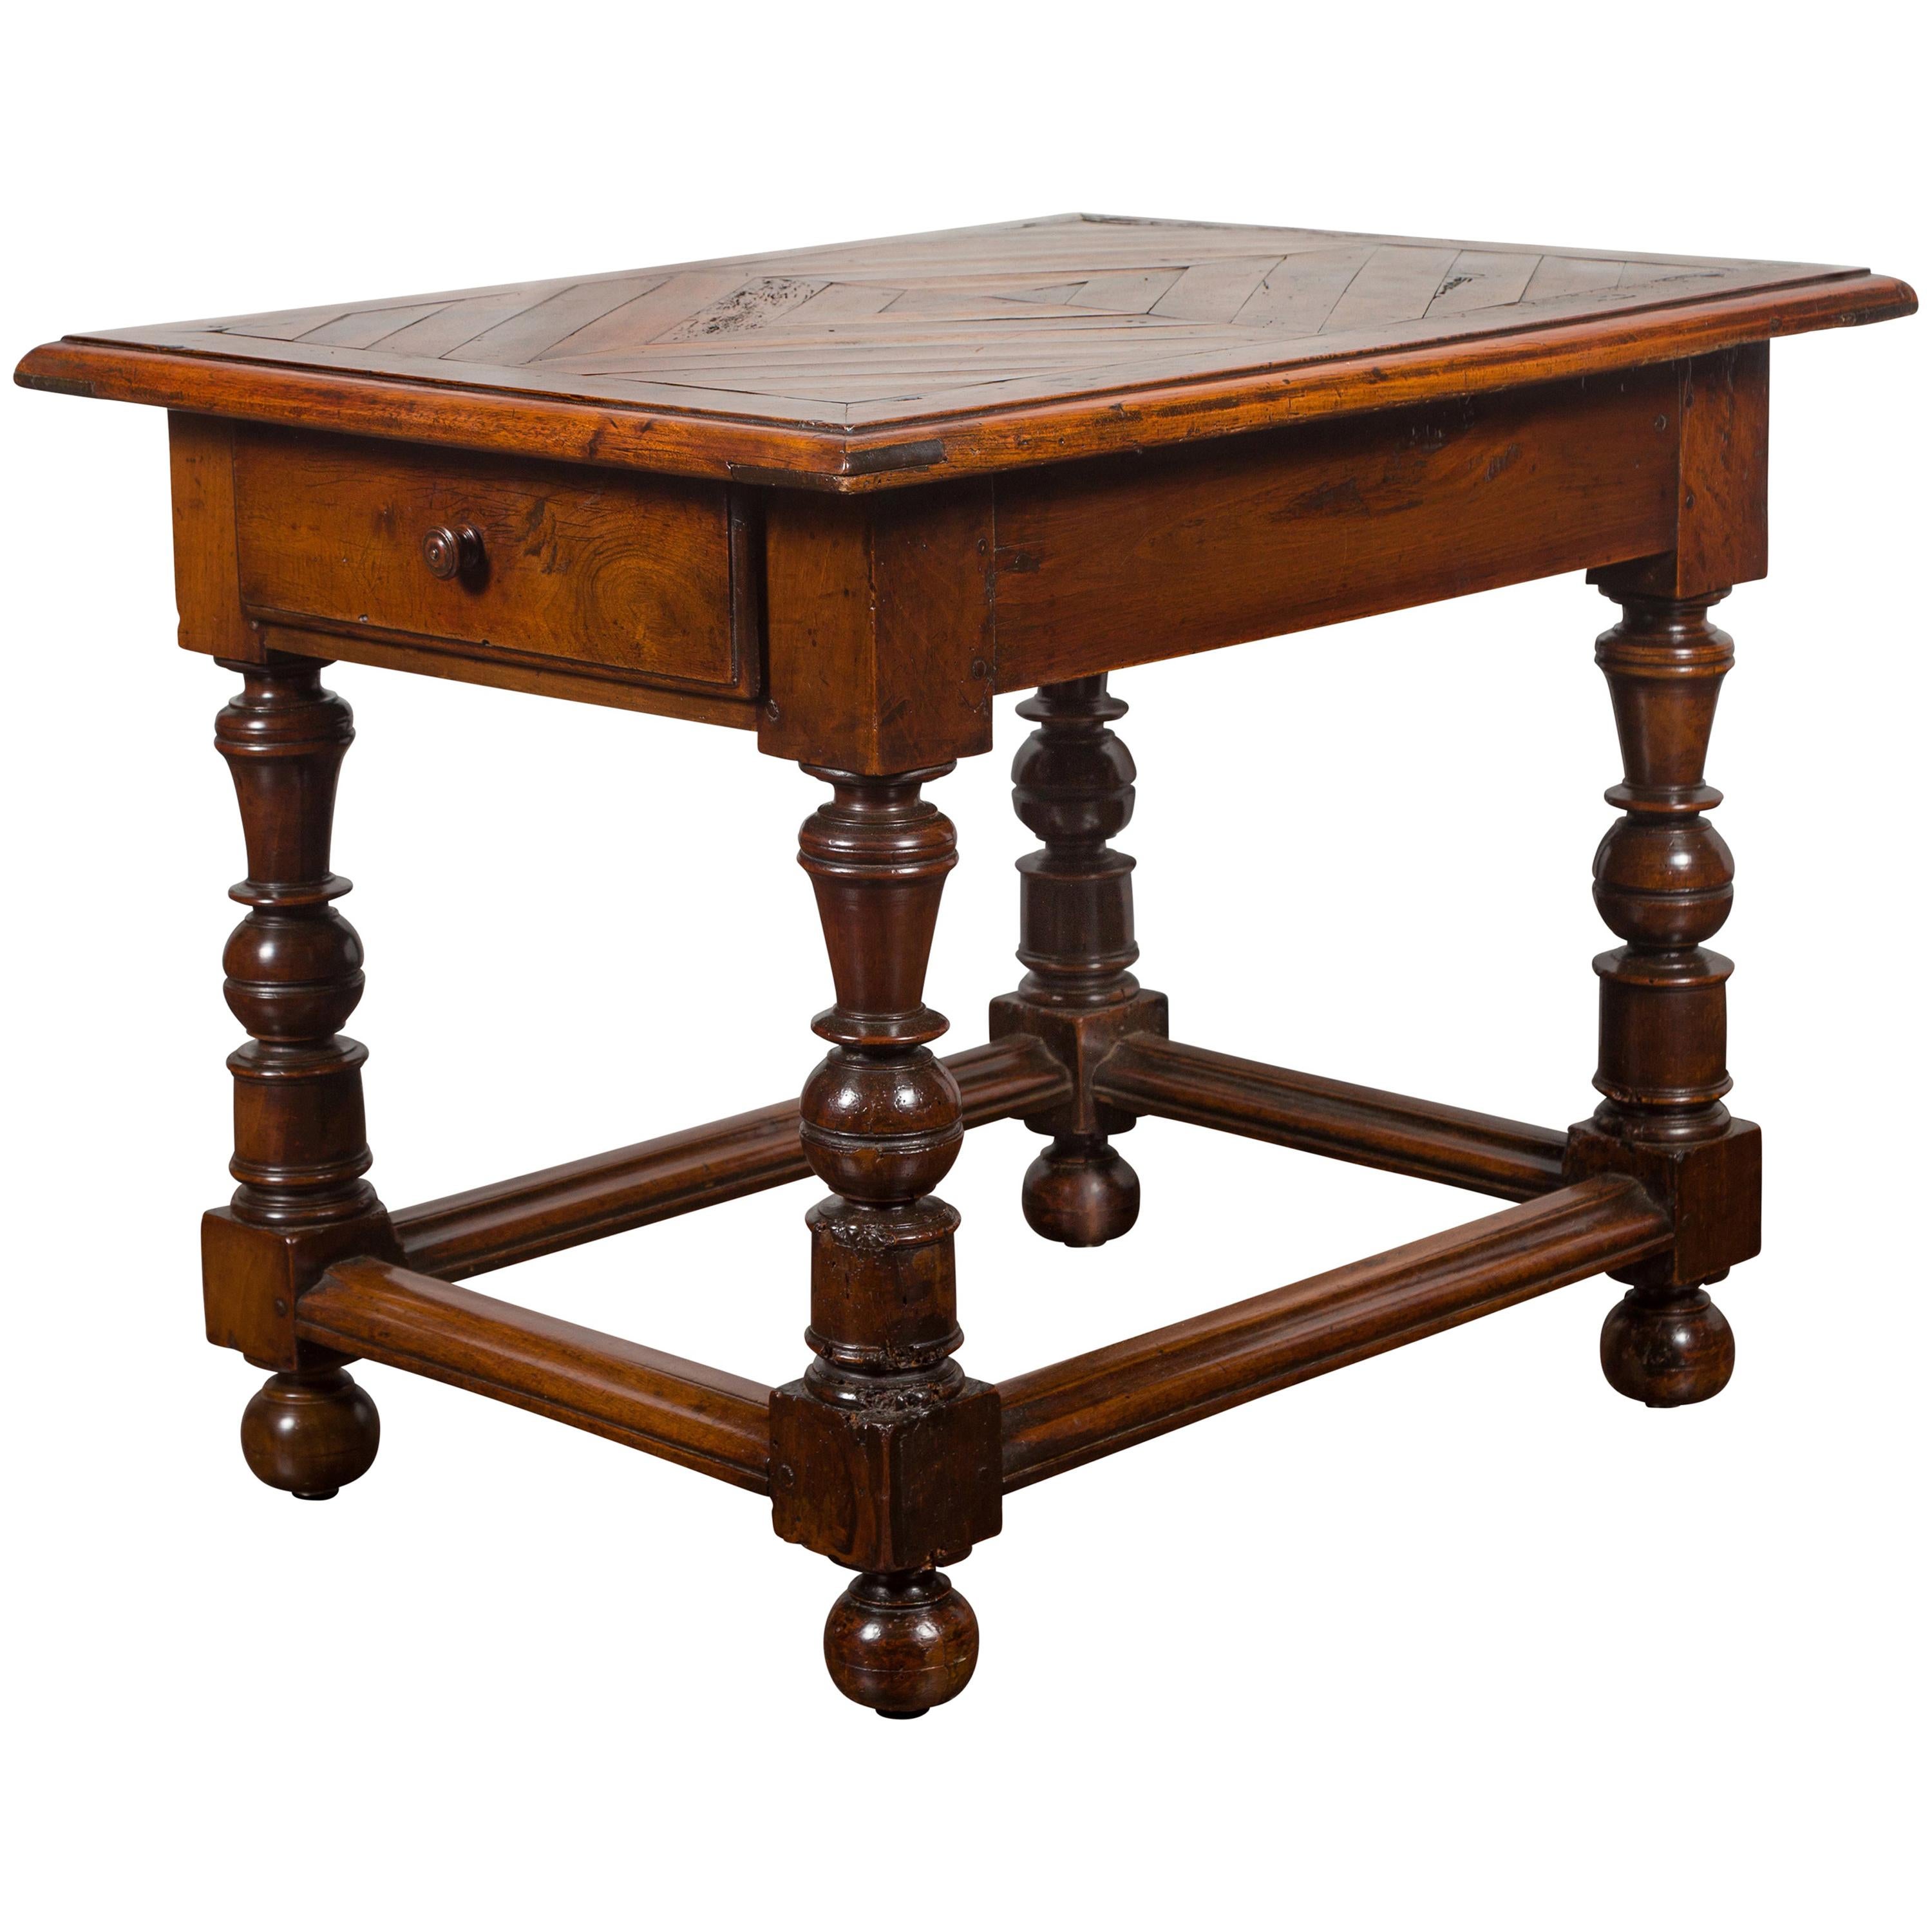 English 1850s Walnut Parquet Top Table with Single Drawer and Turned Legs